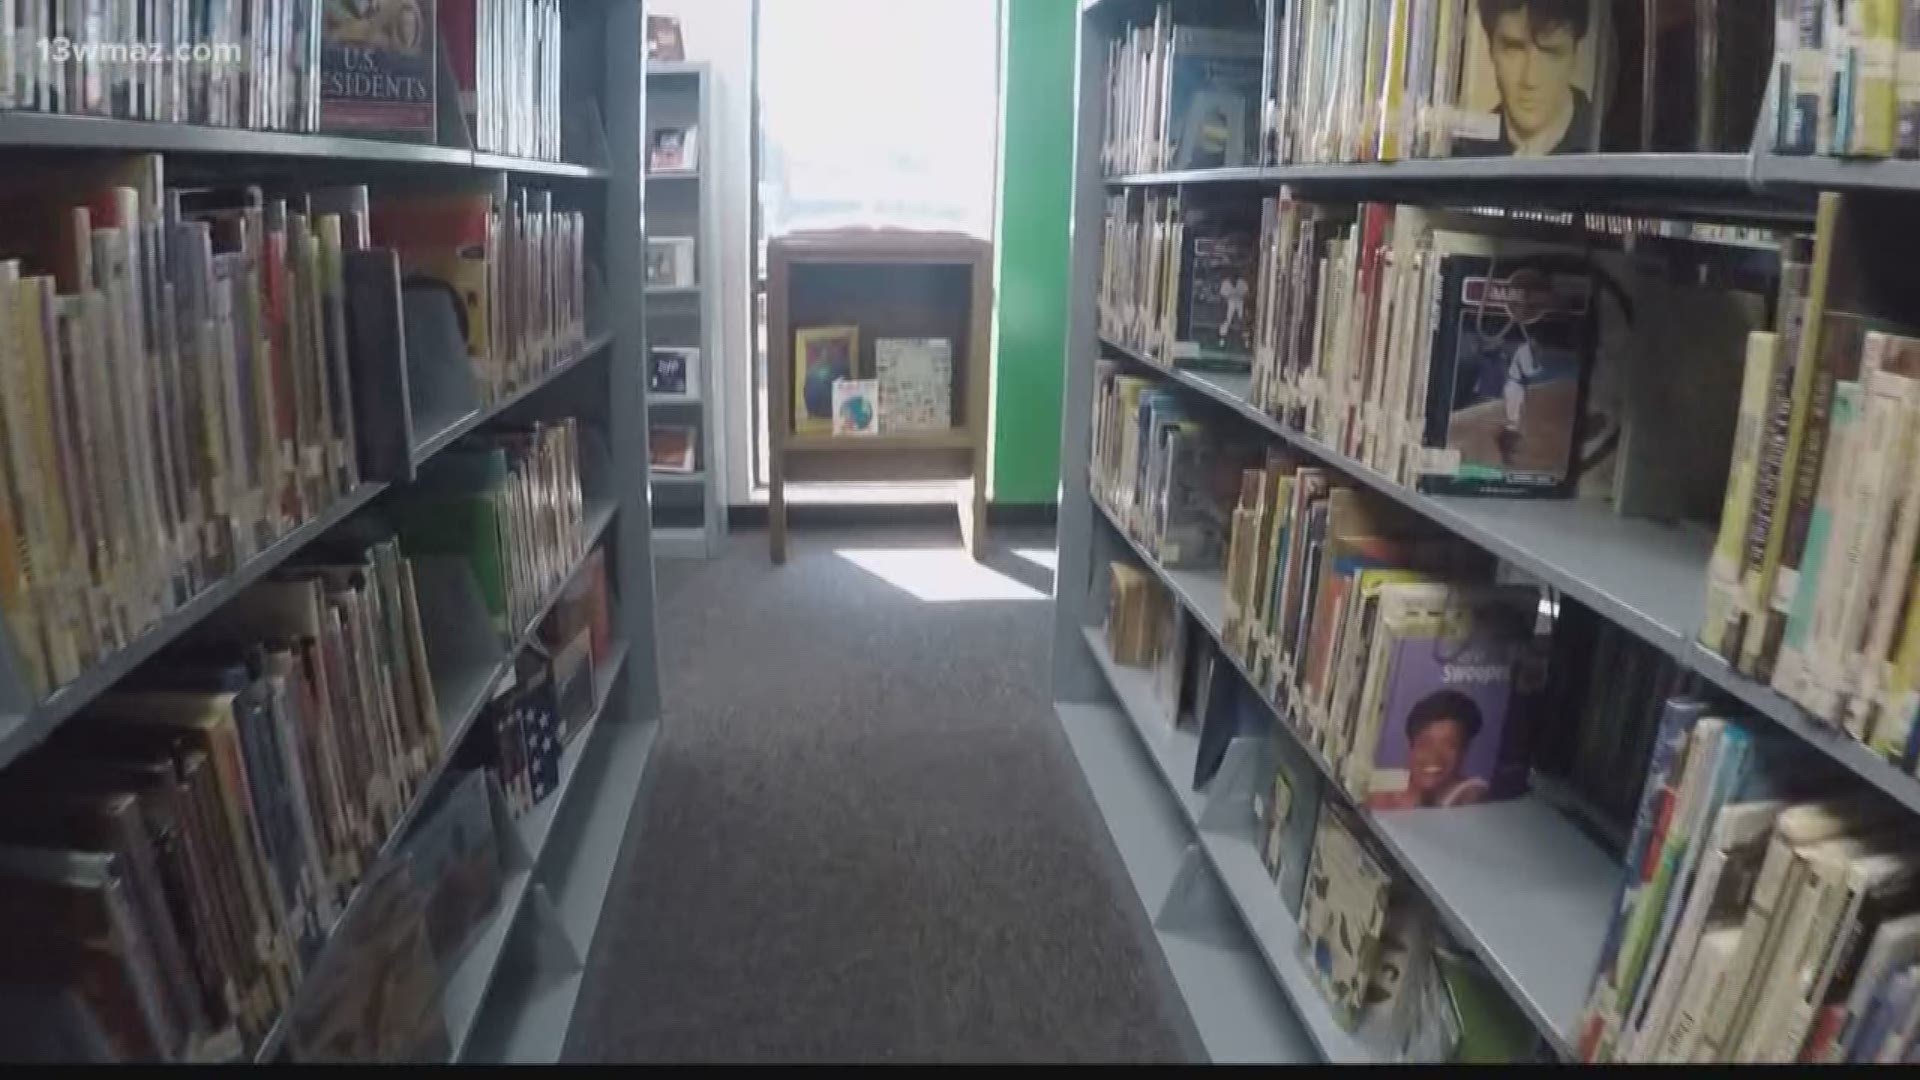 VERIFY: Has Baldwin County cut funding for its libraries?